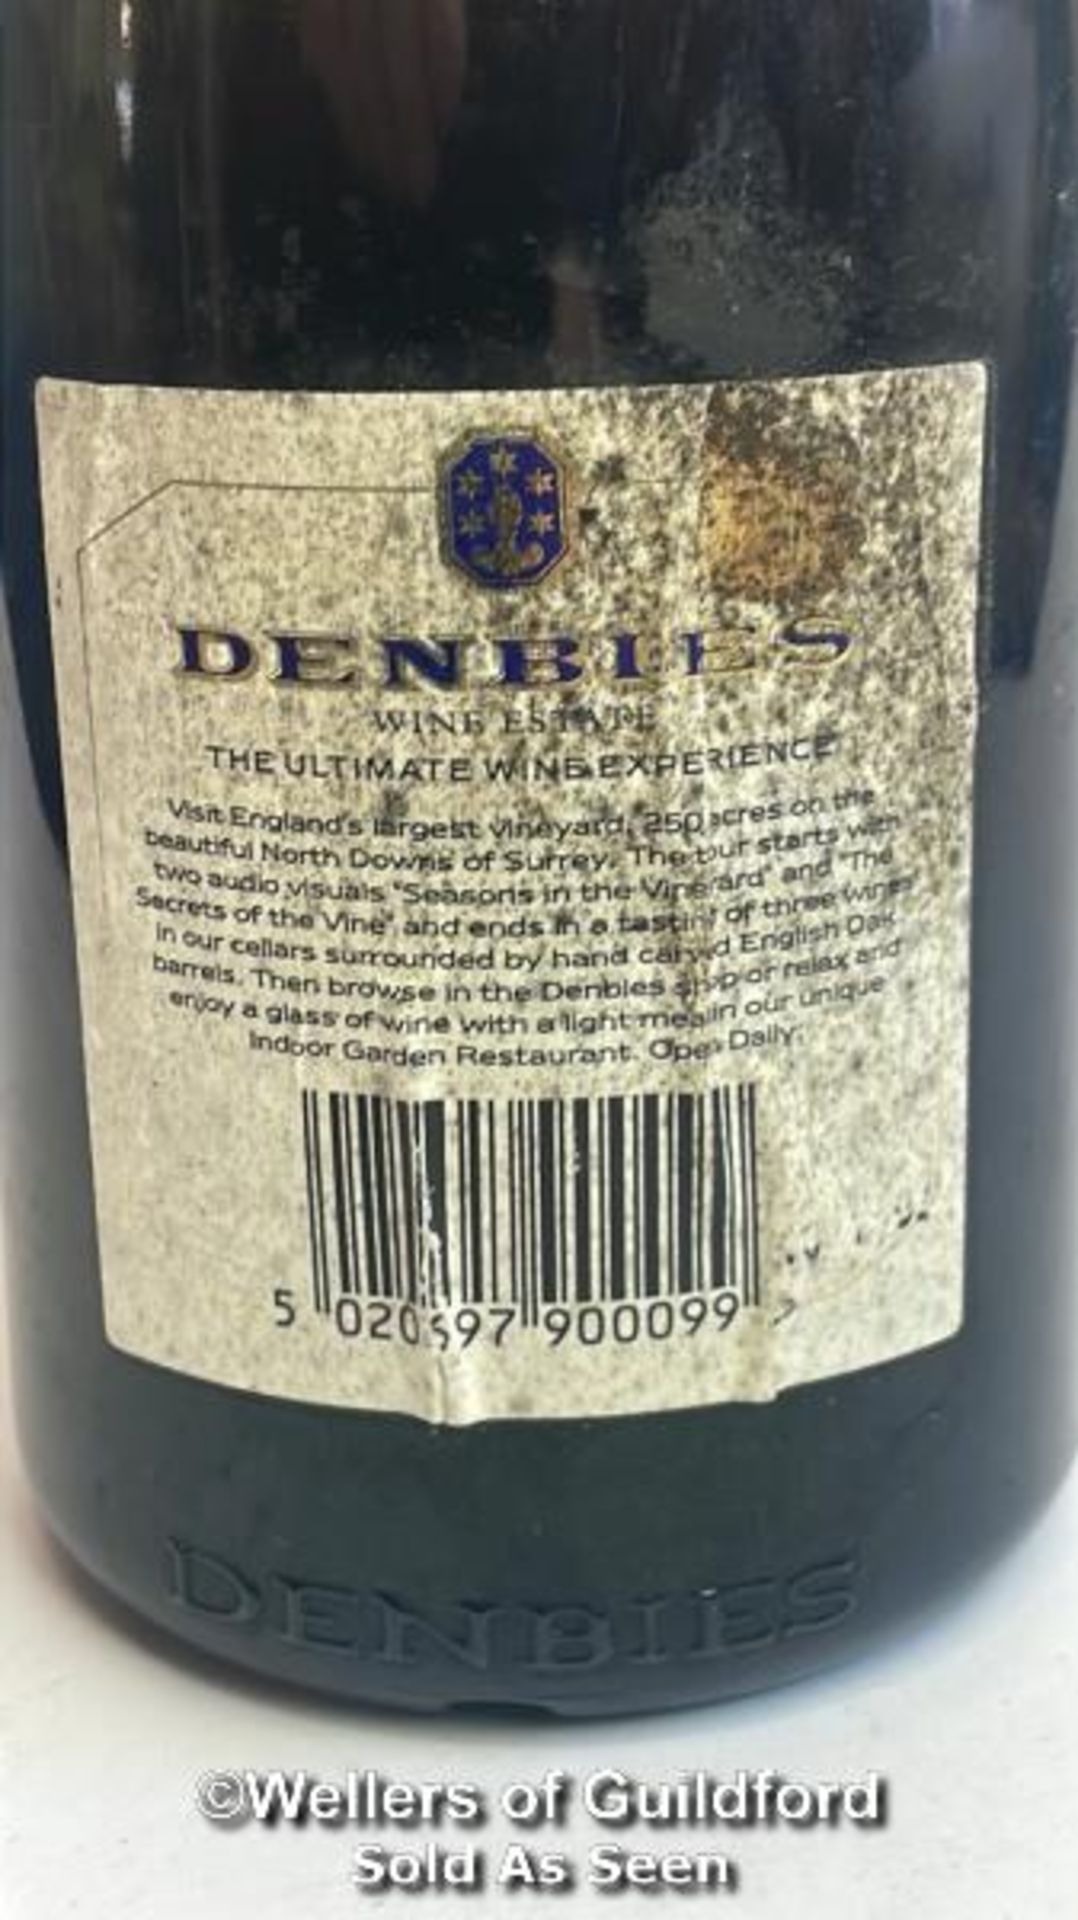 1992 Denbies Pino Gris, 75cl, 10.5% vol / Please see images for fill level and general condition. - Bild 4 aus 5